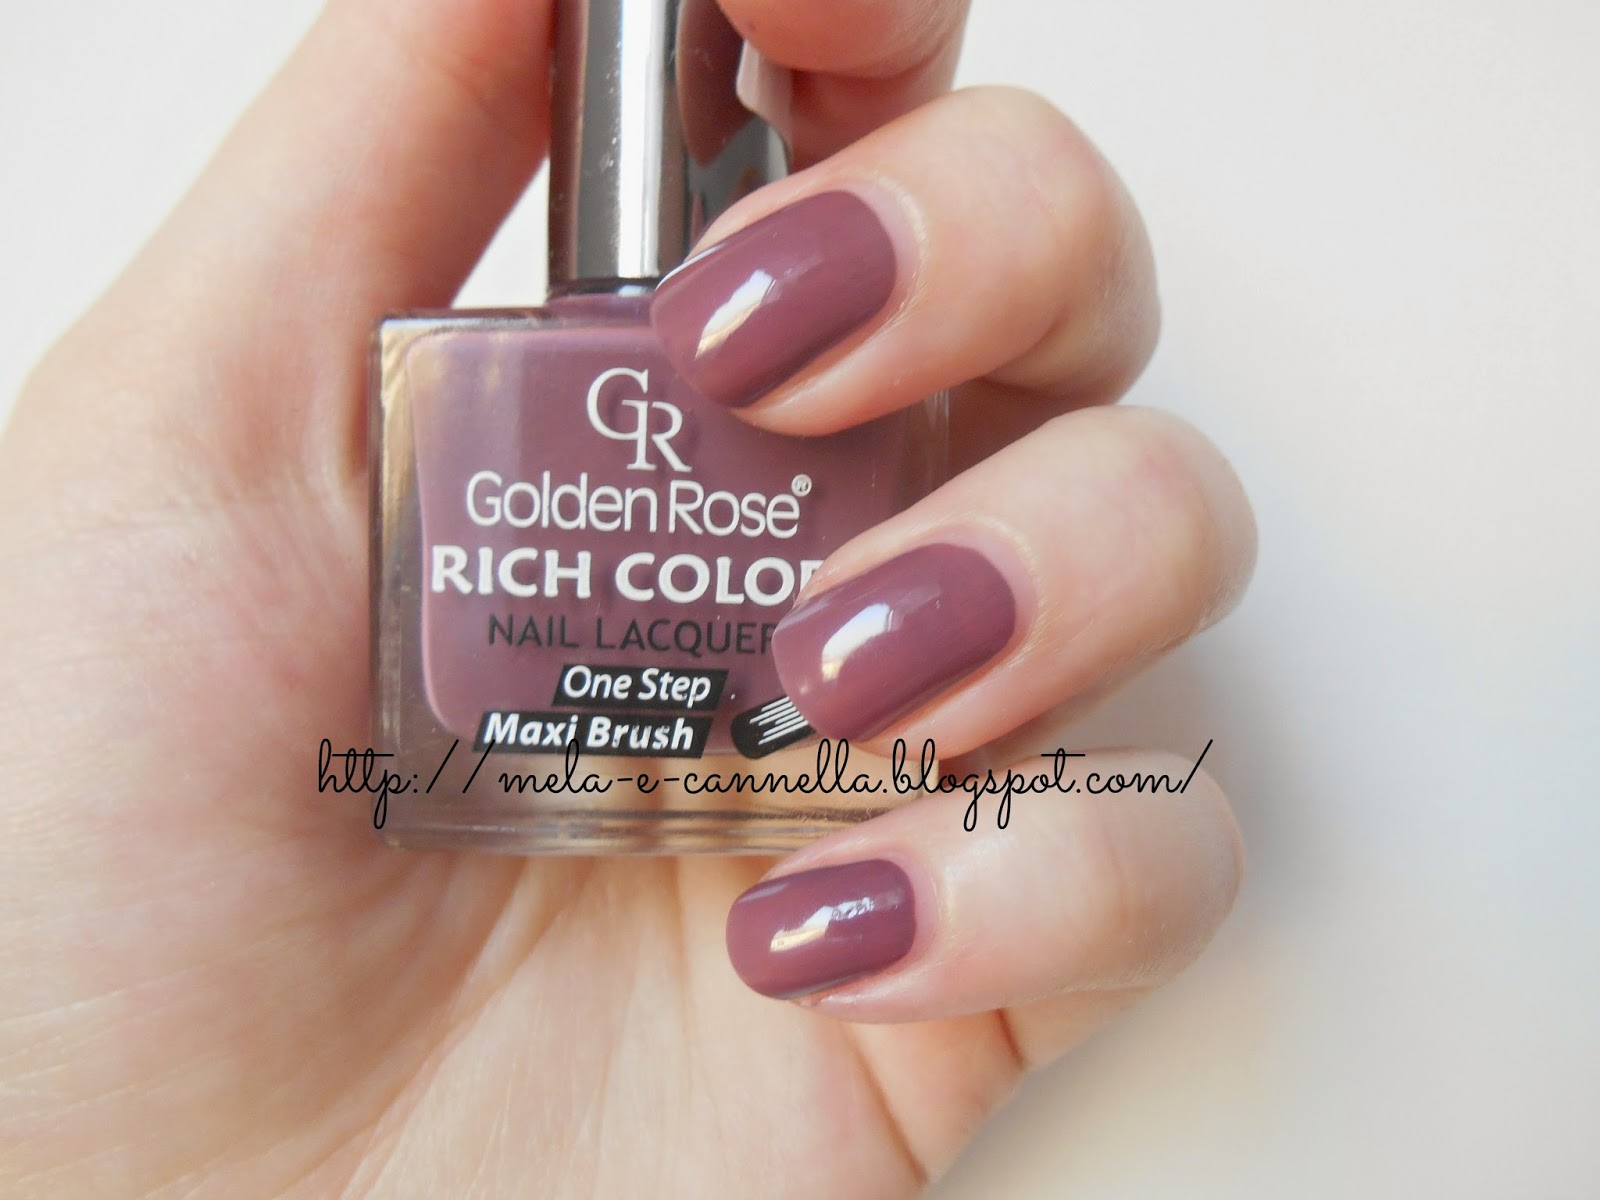 3. OPI Nail Lacquer - Rose Gold - wide 3